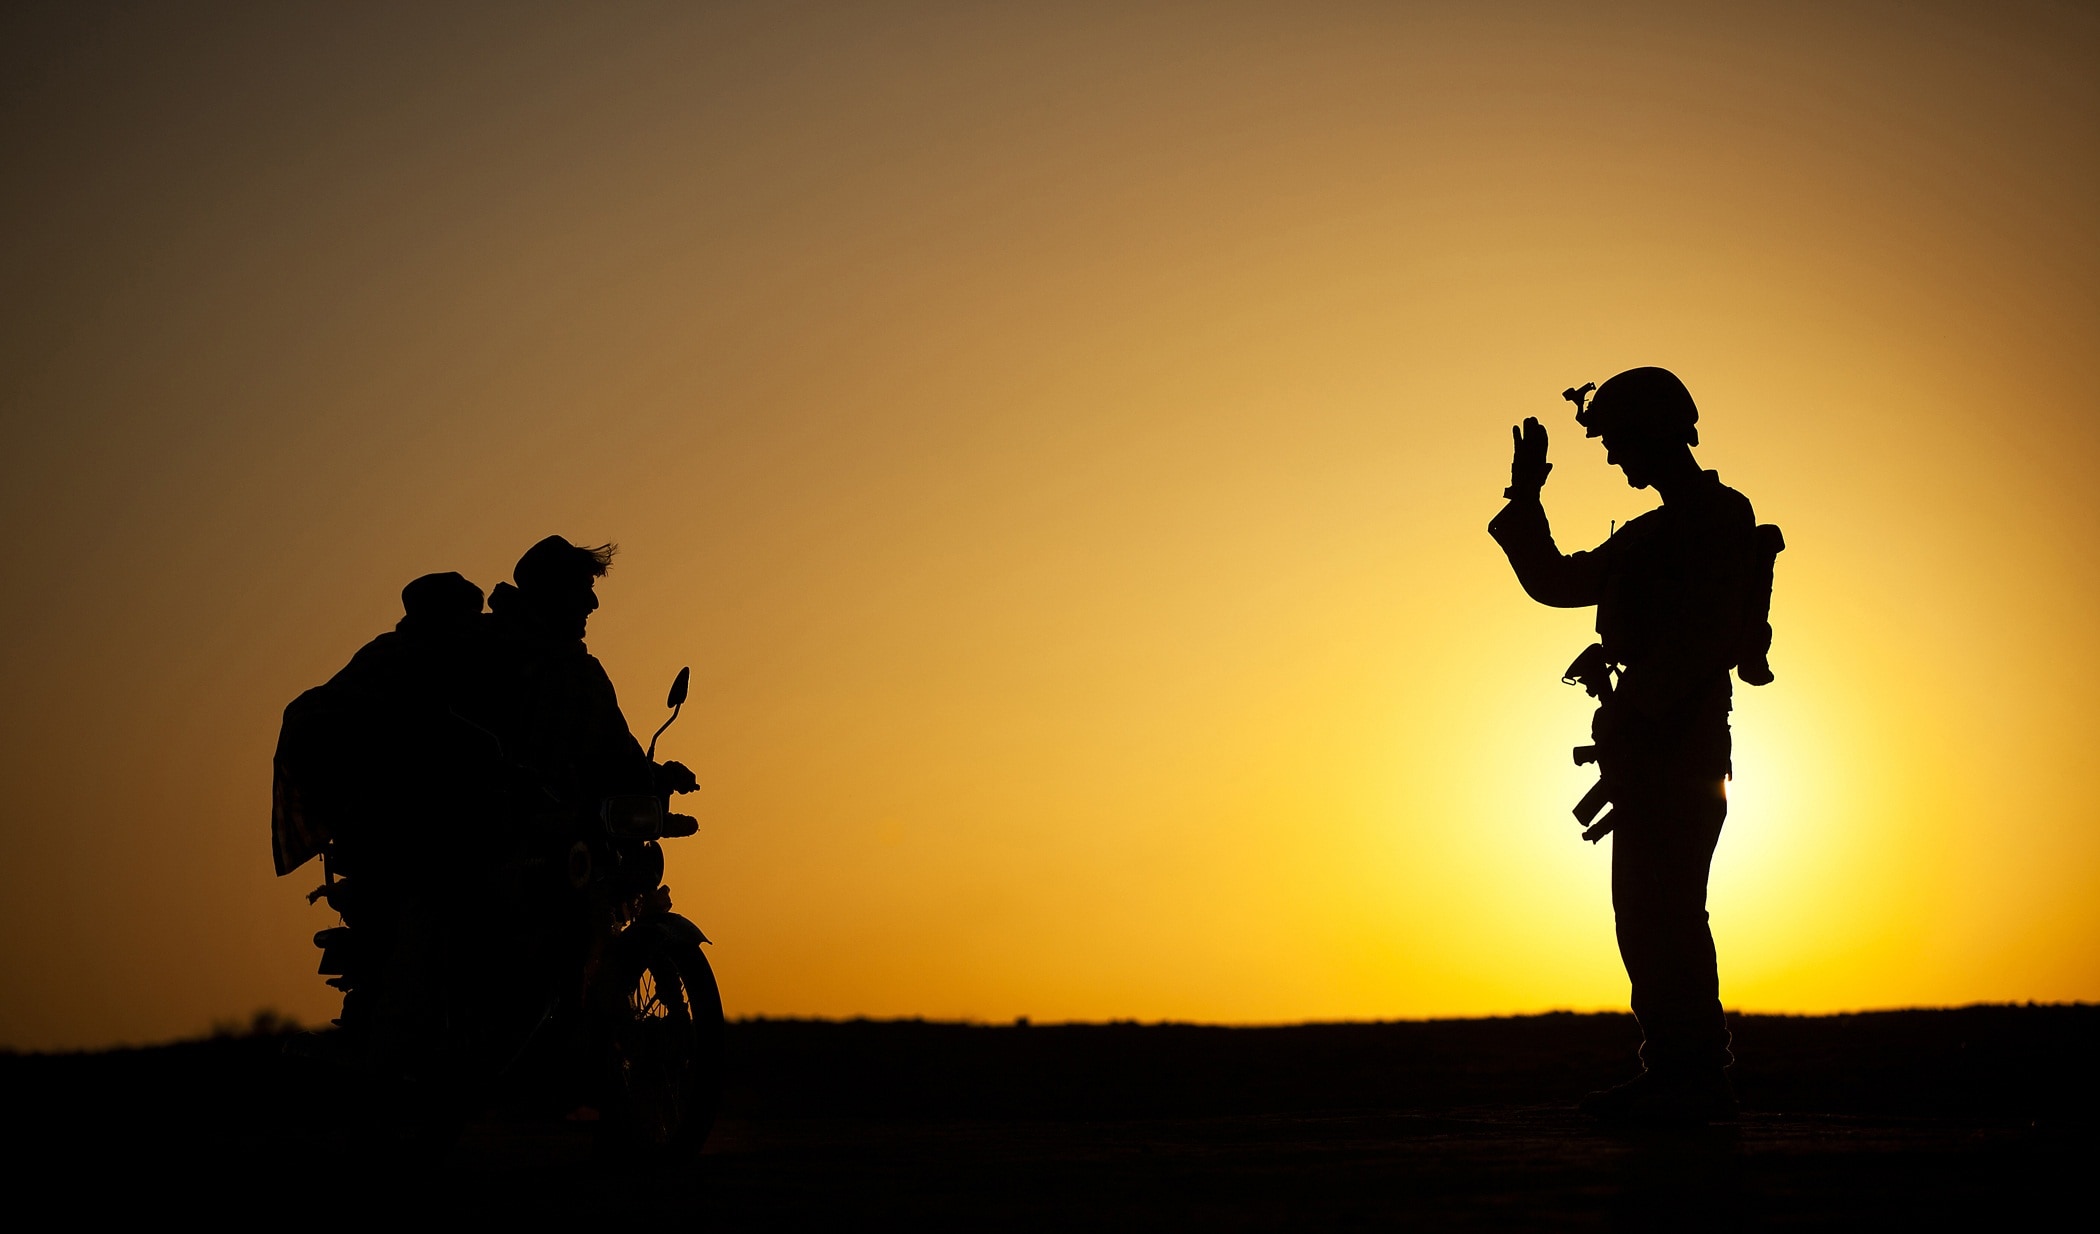 silhouette photo of soldier waving hand in front of two people riding motorcycle